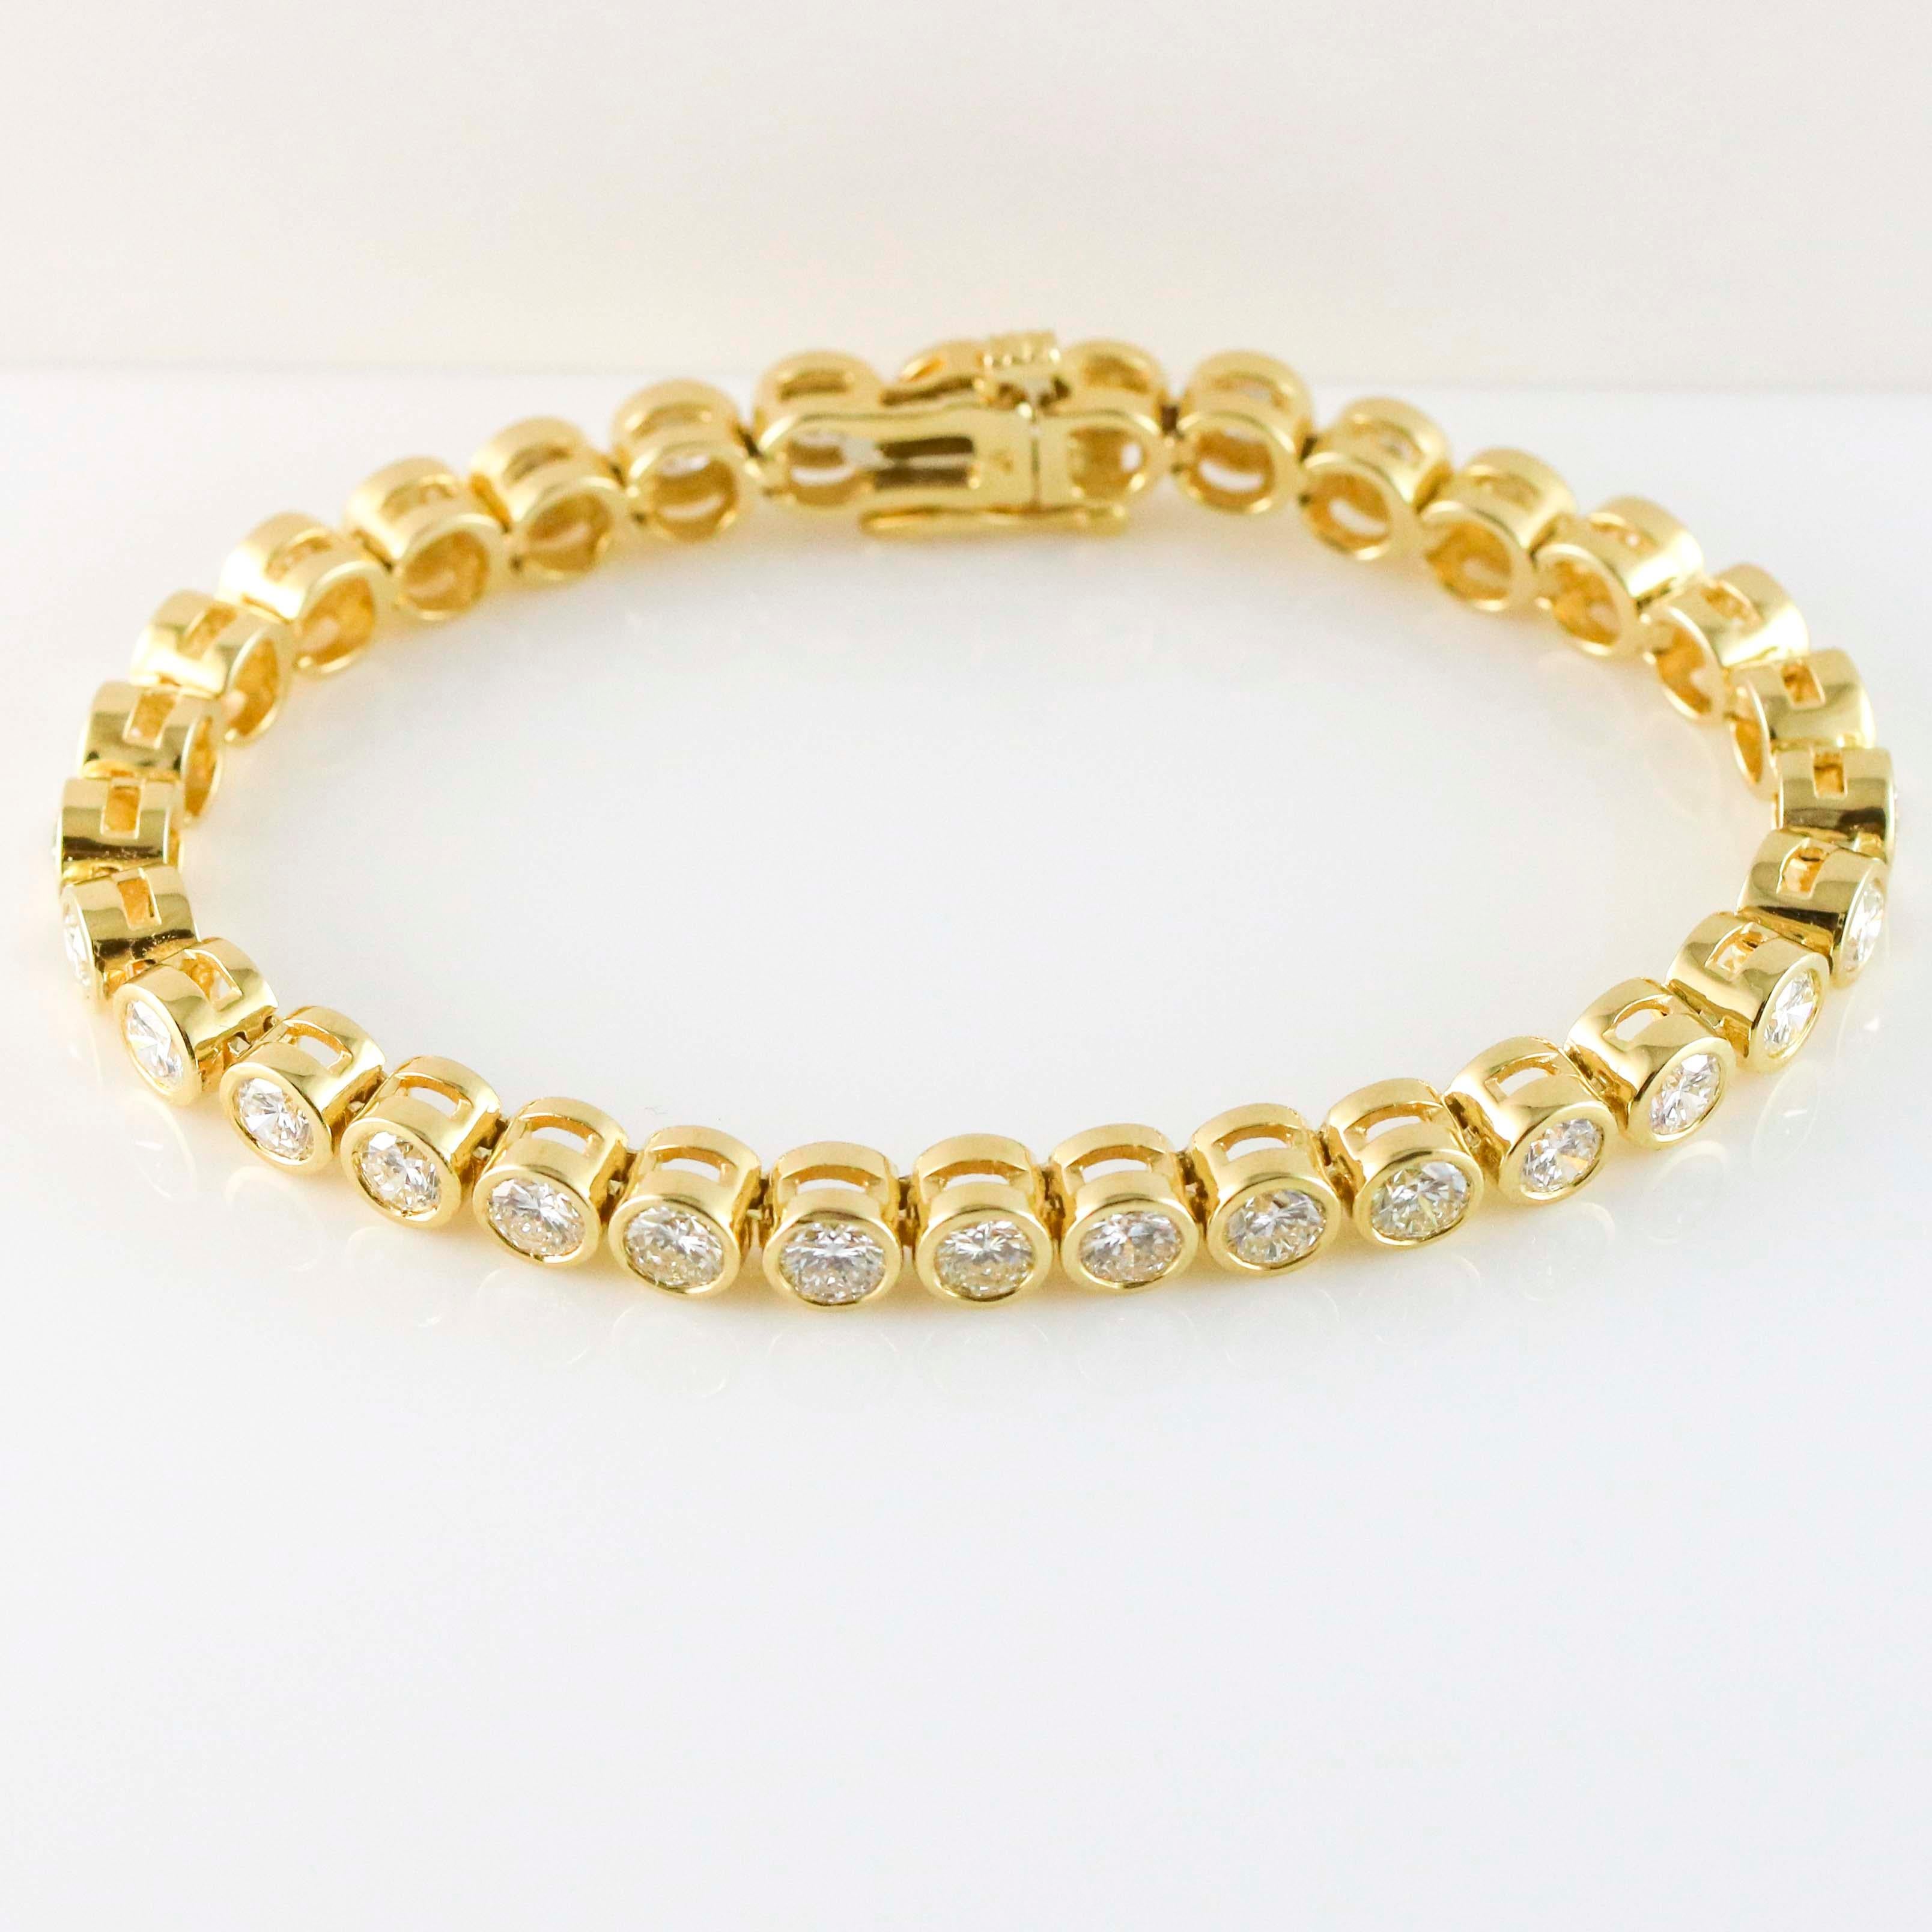 In-line diamond tennis bracelet crafted in 14k yellow gold. The bracelet is bezel-set with 32 round brilliant cut diamonds. Safety slide clasp. Diamonds, VS-SI G-I. Weight, 21.9 grams.